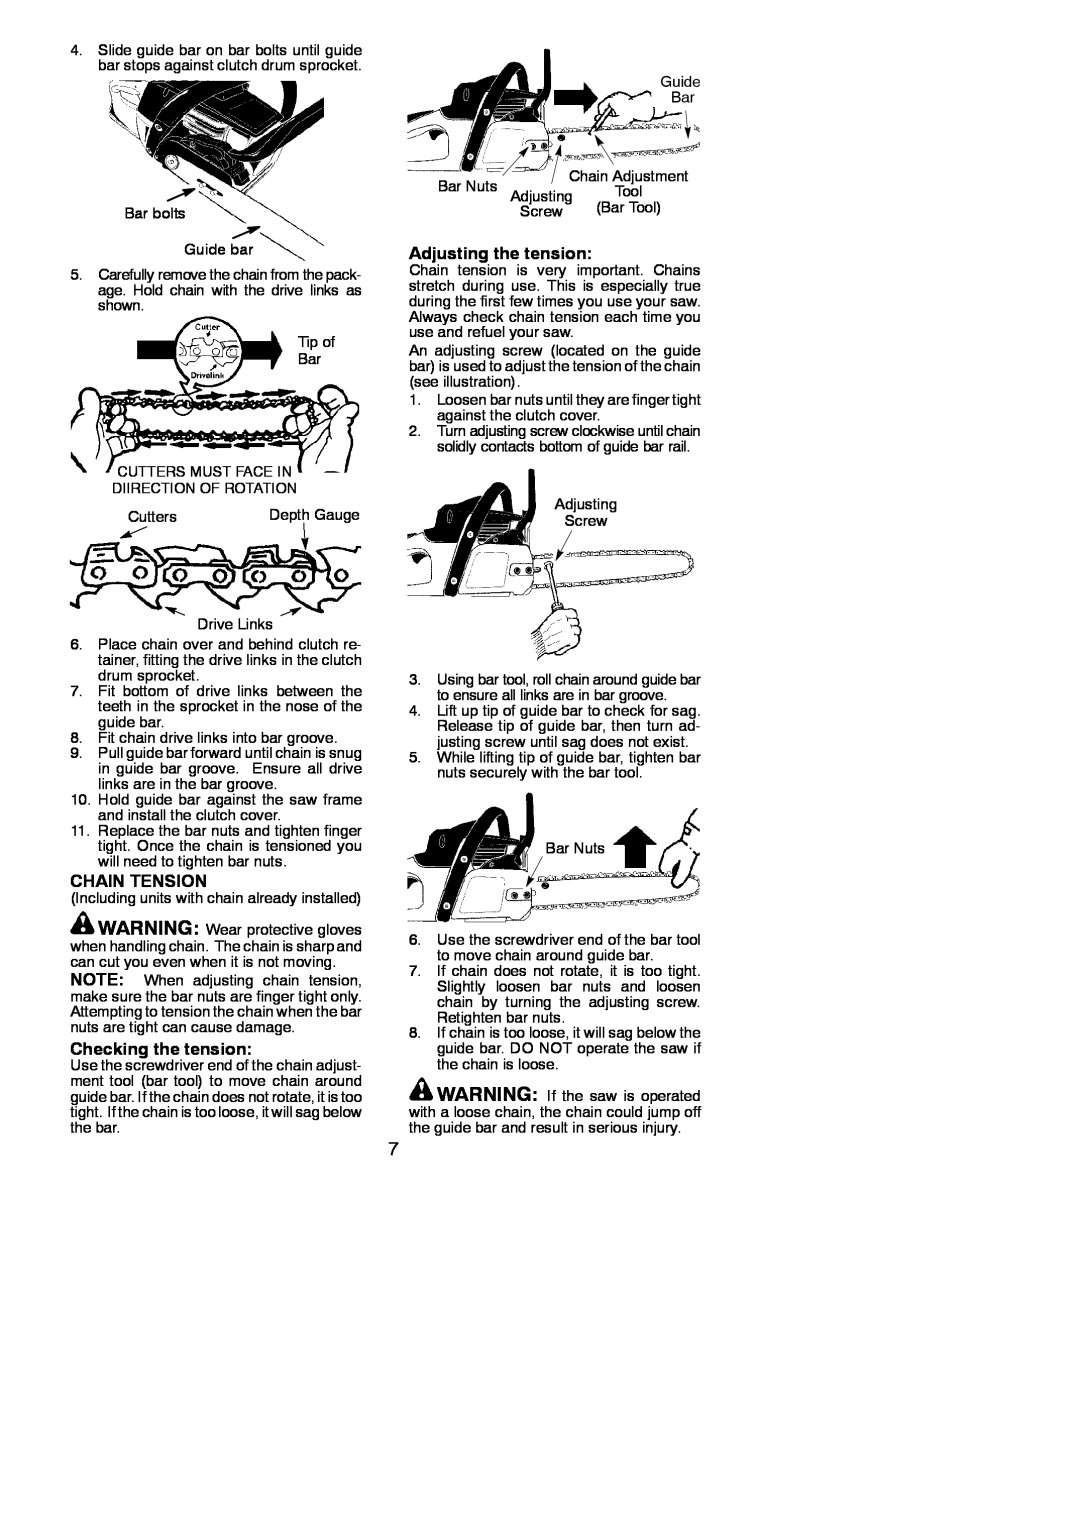 Poulan P4018WTL instruction manual Chain Tension, Checking the tension, Adjusting the tension 